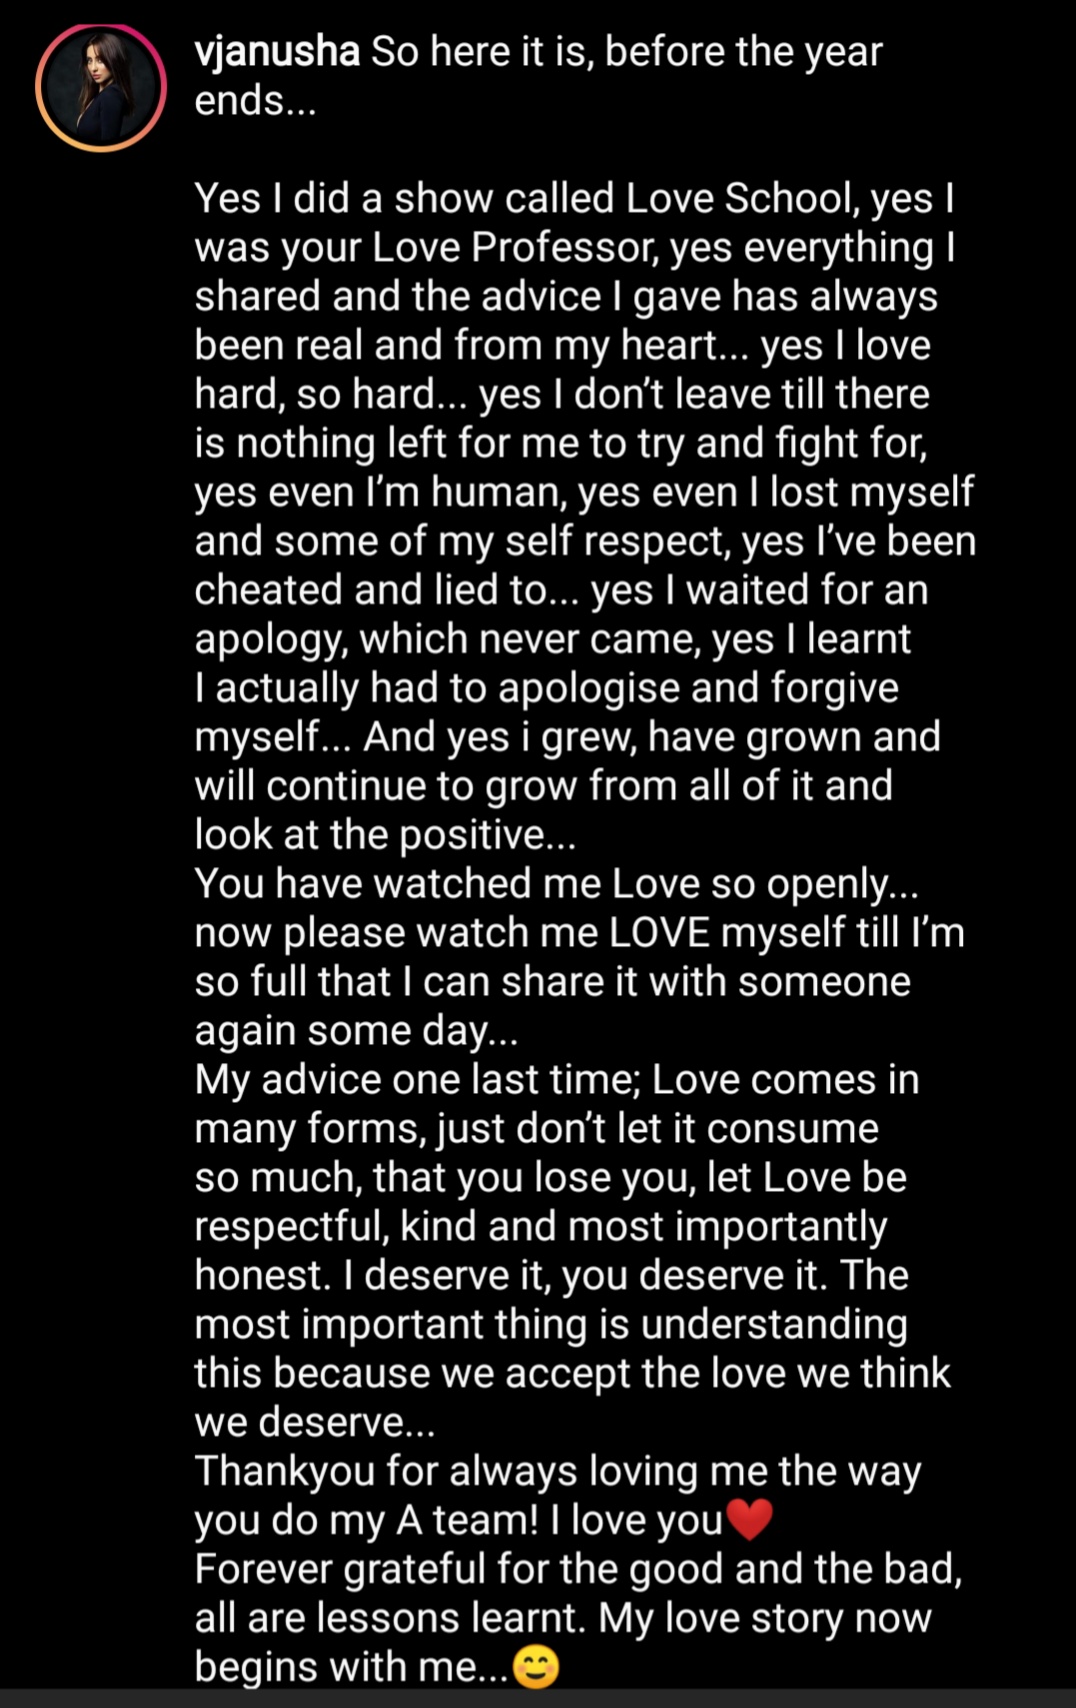 I have been cheated and lied to - Anusha Dandekar breaks her silence on breakup with Karan Kundrra